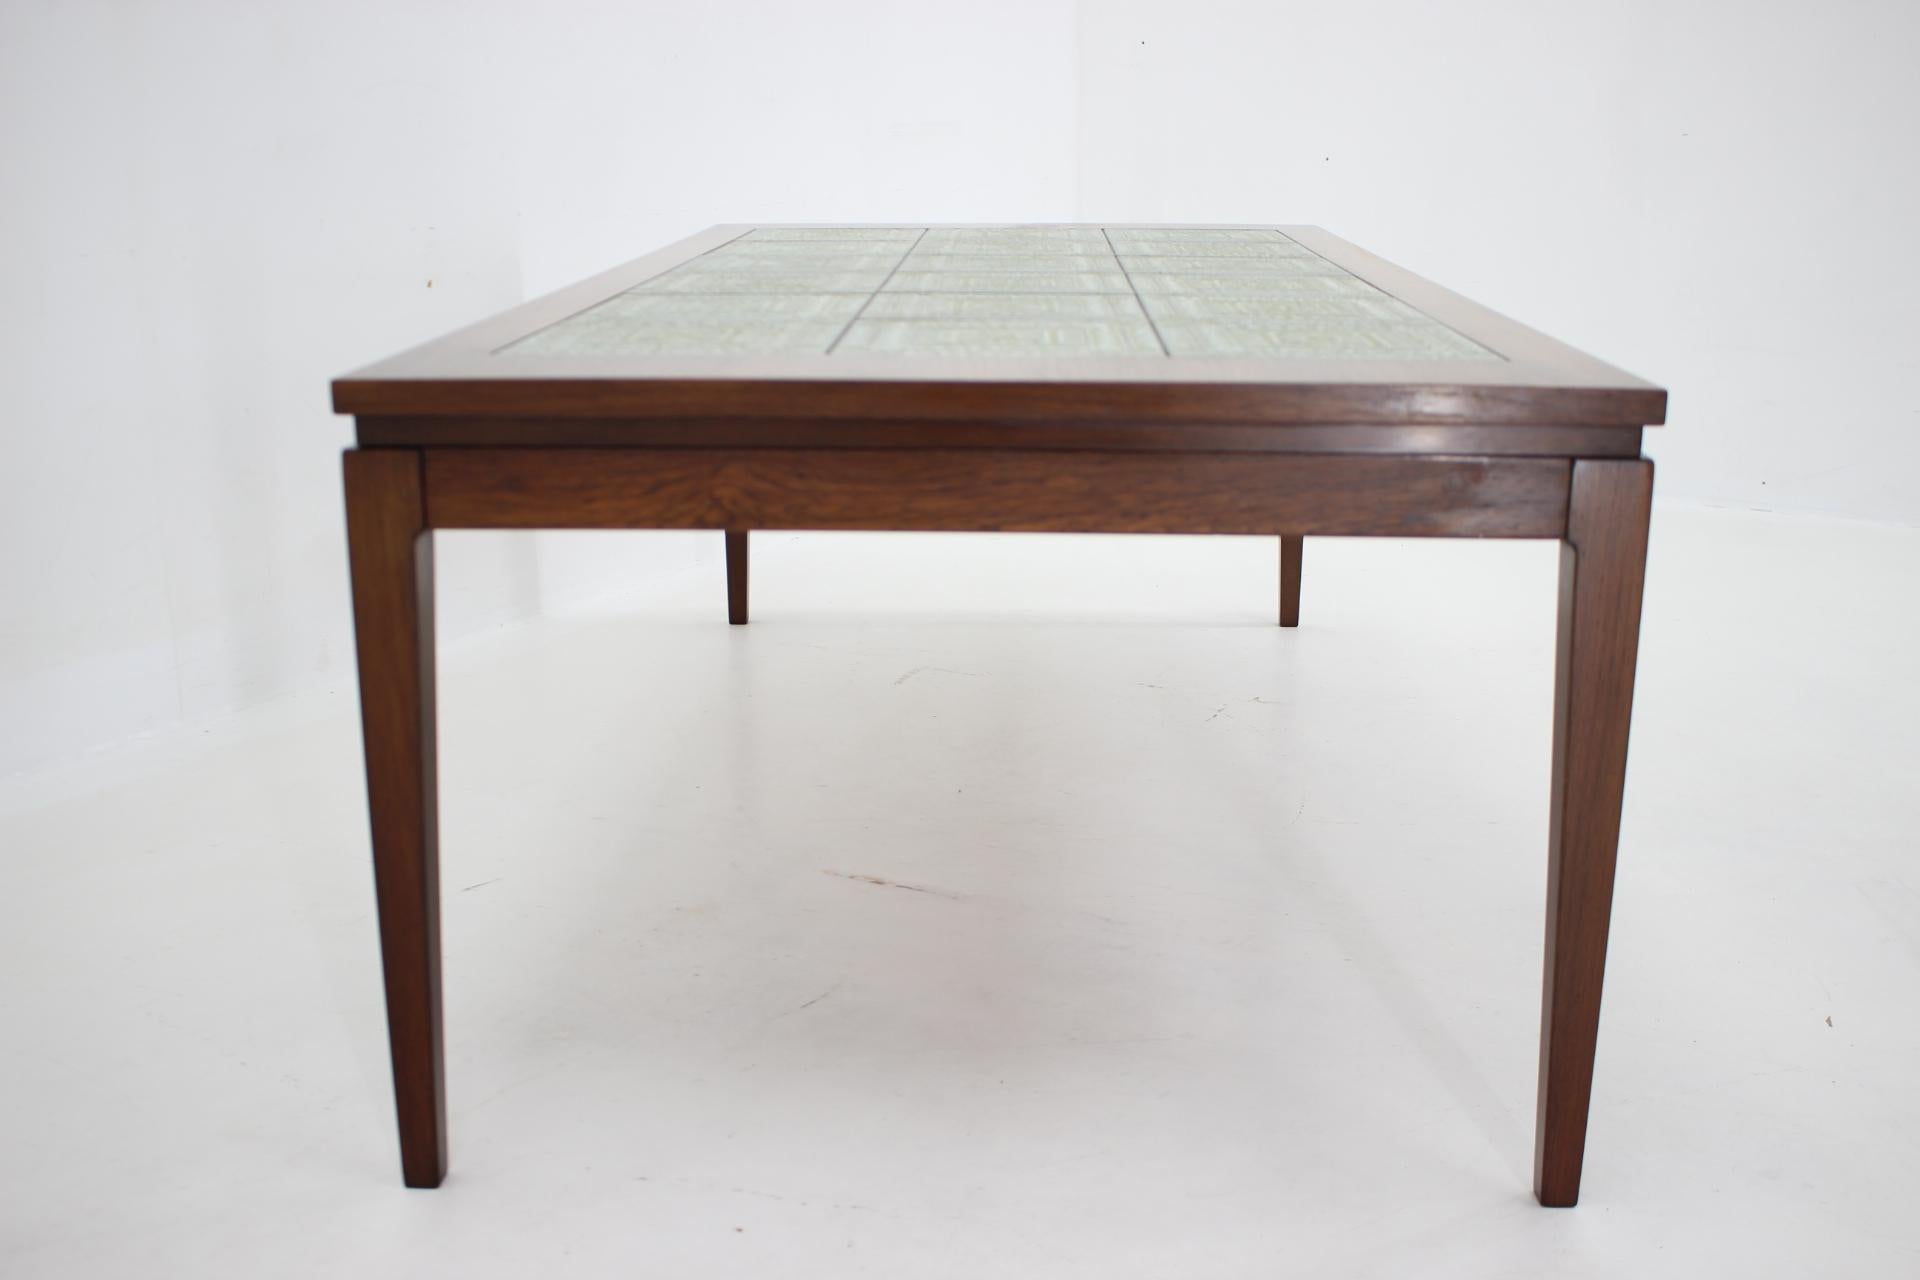 1960s Palisander and Tile Coffee Table, Denmark For Sale 2